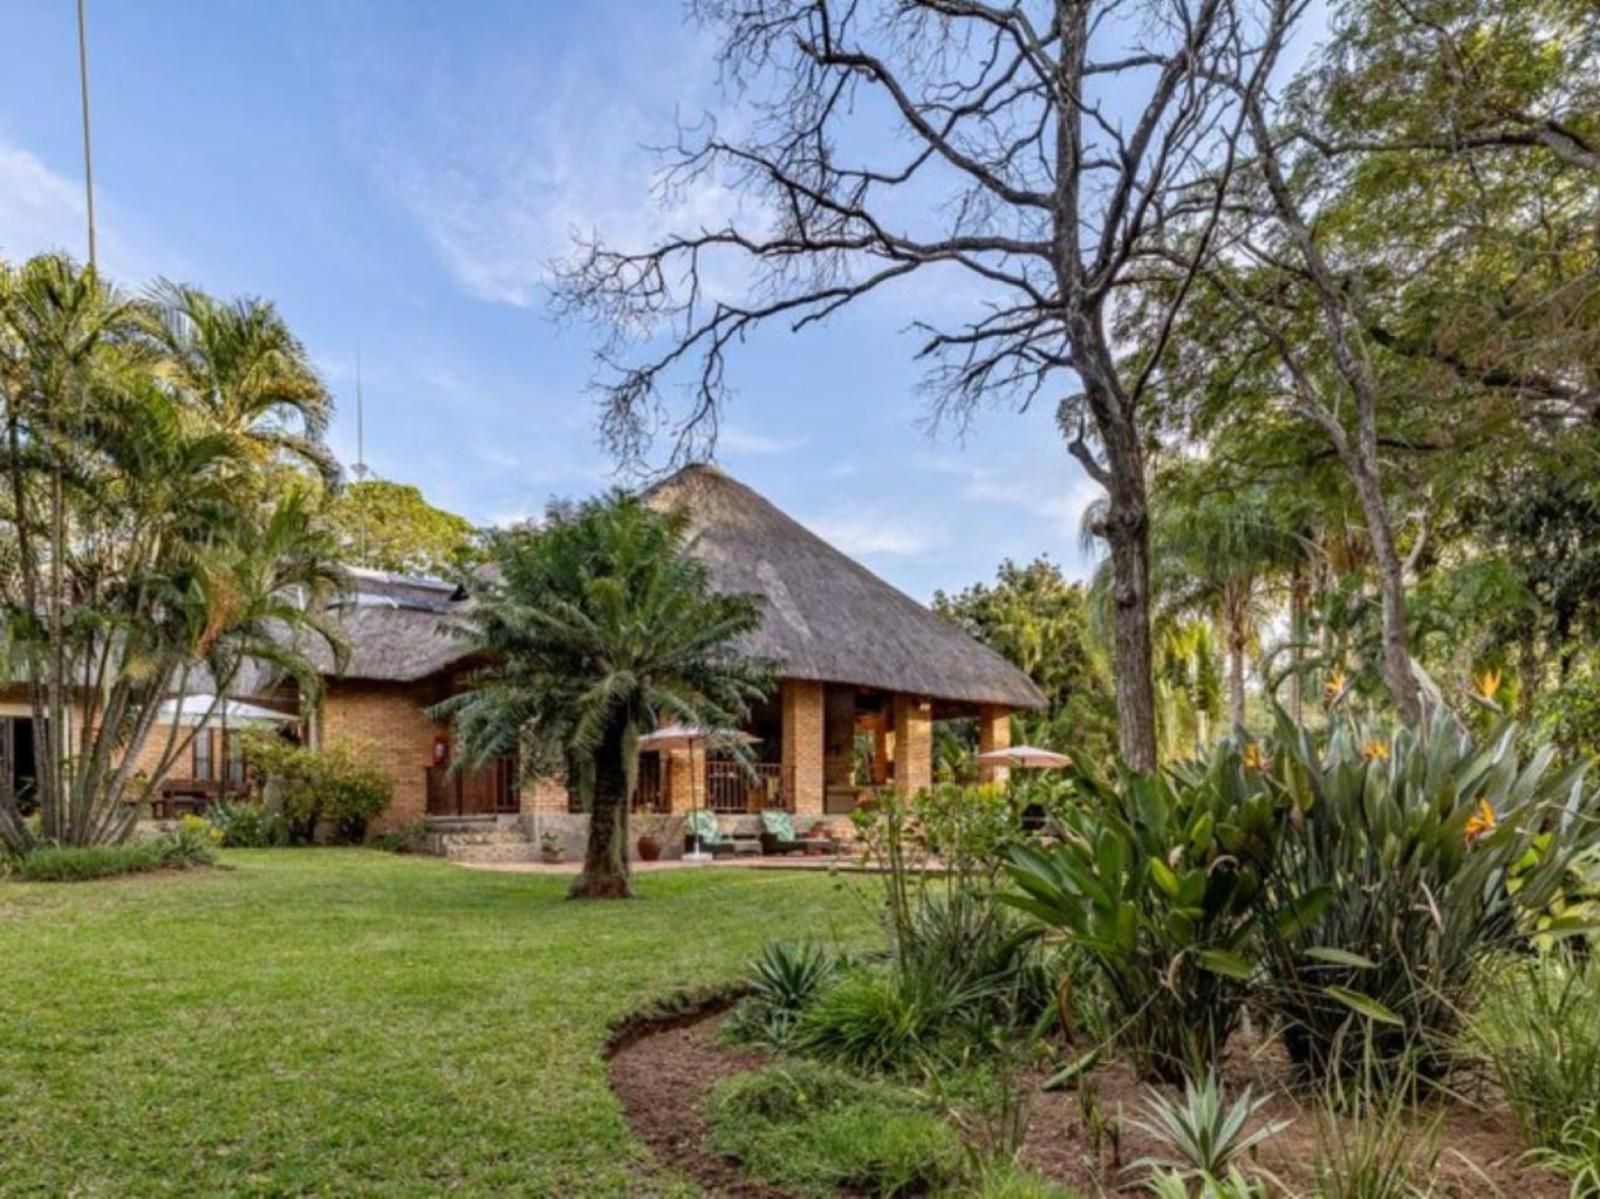 Dreamfields Guesthouse Hazyview Mpumalanga South Africa Complementary Colors, Palm Tree, Plant, Nature, Wood